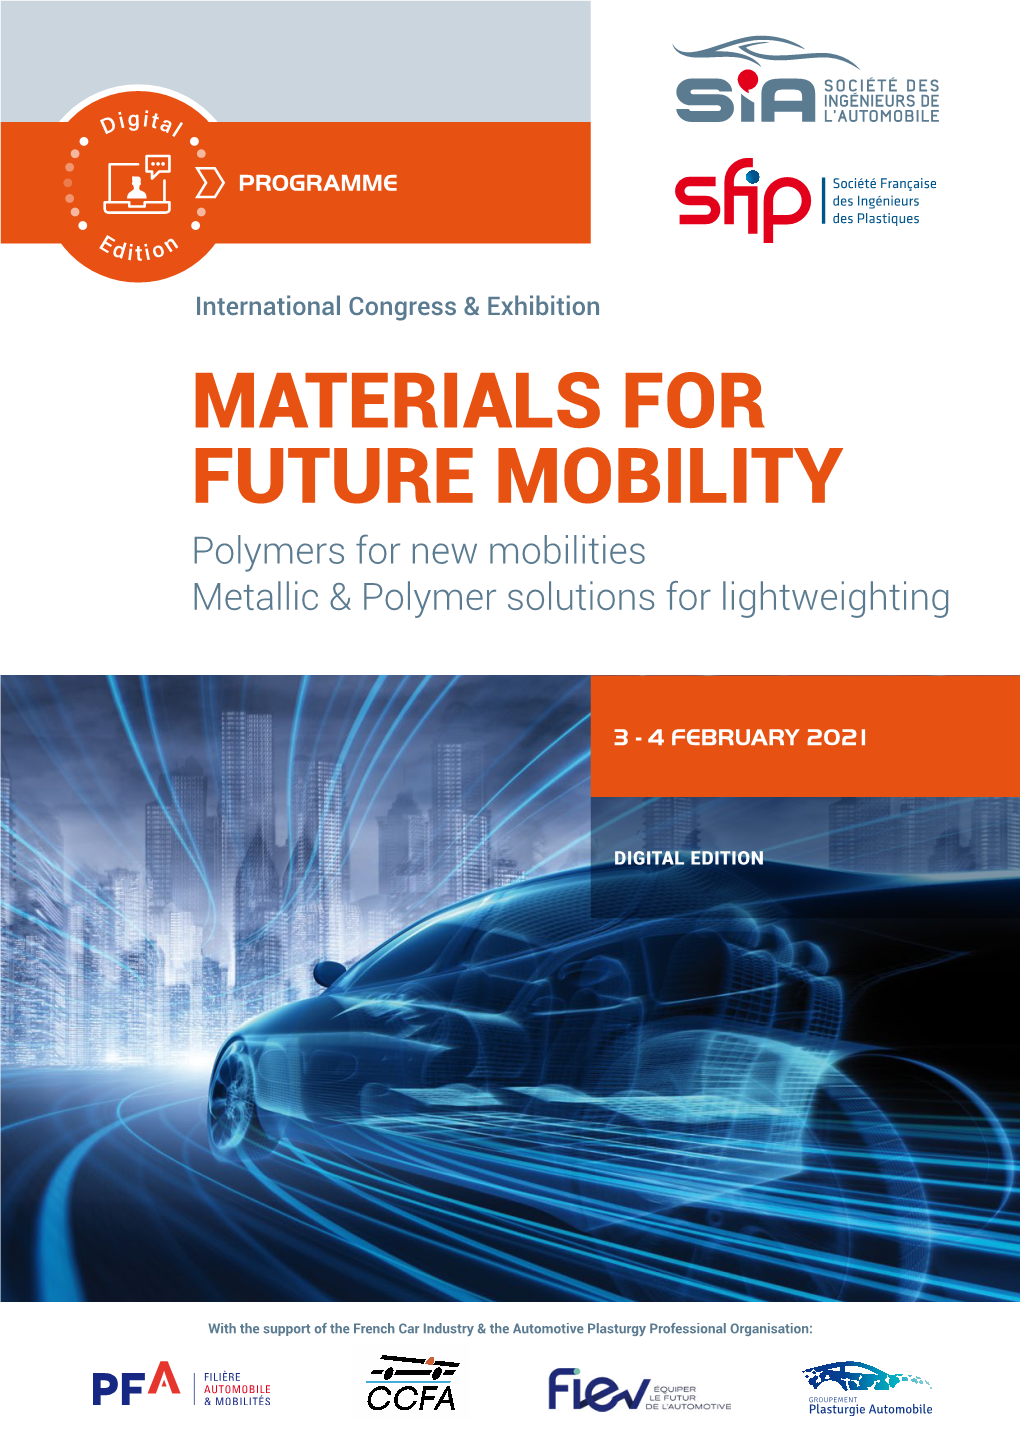 MATERIALS for FUTURE MOBILITY Polymers for New Mobilities Metallic & Polymer Solutions for Lightweighting